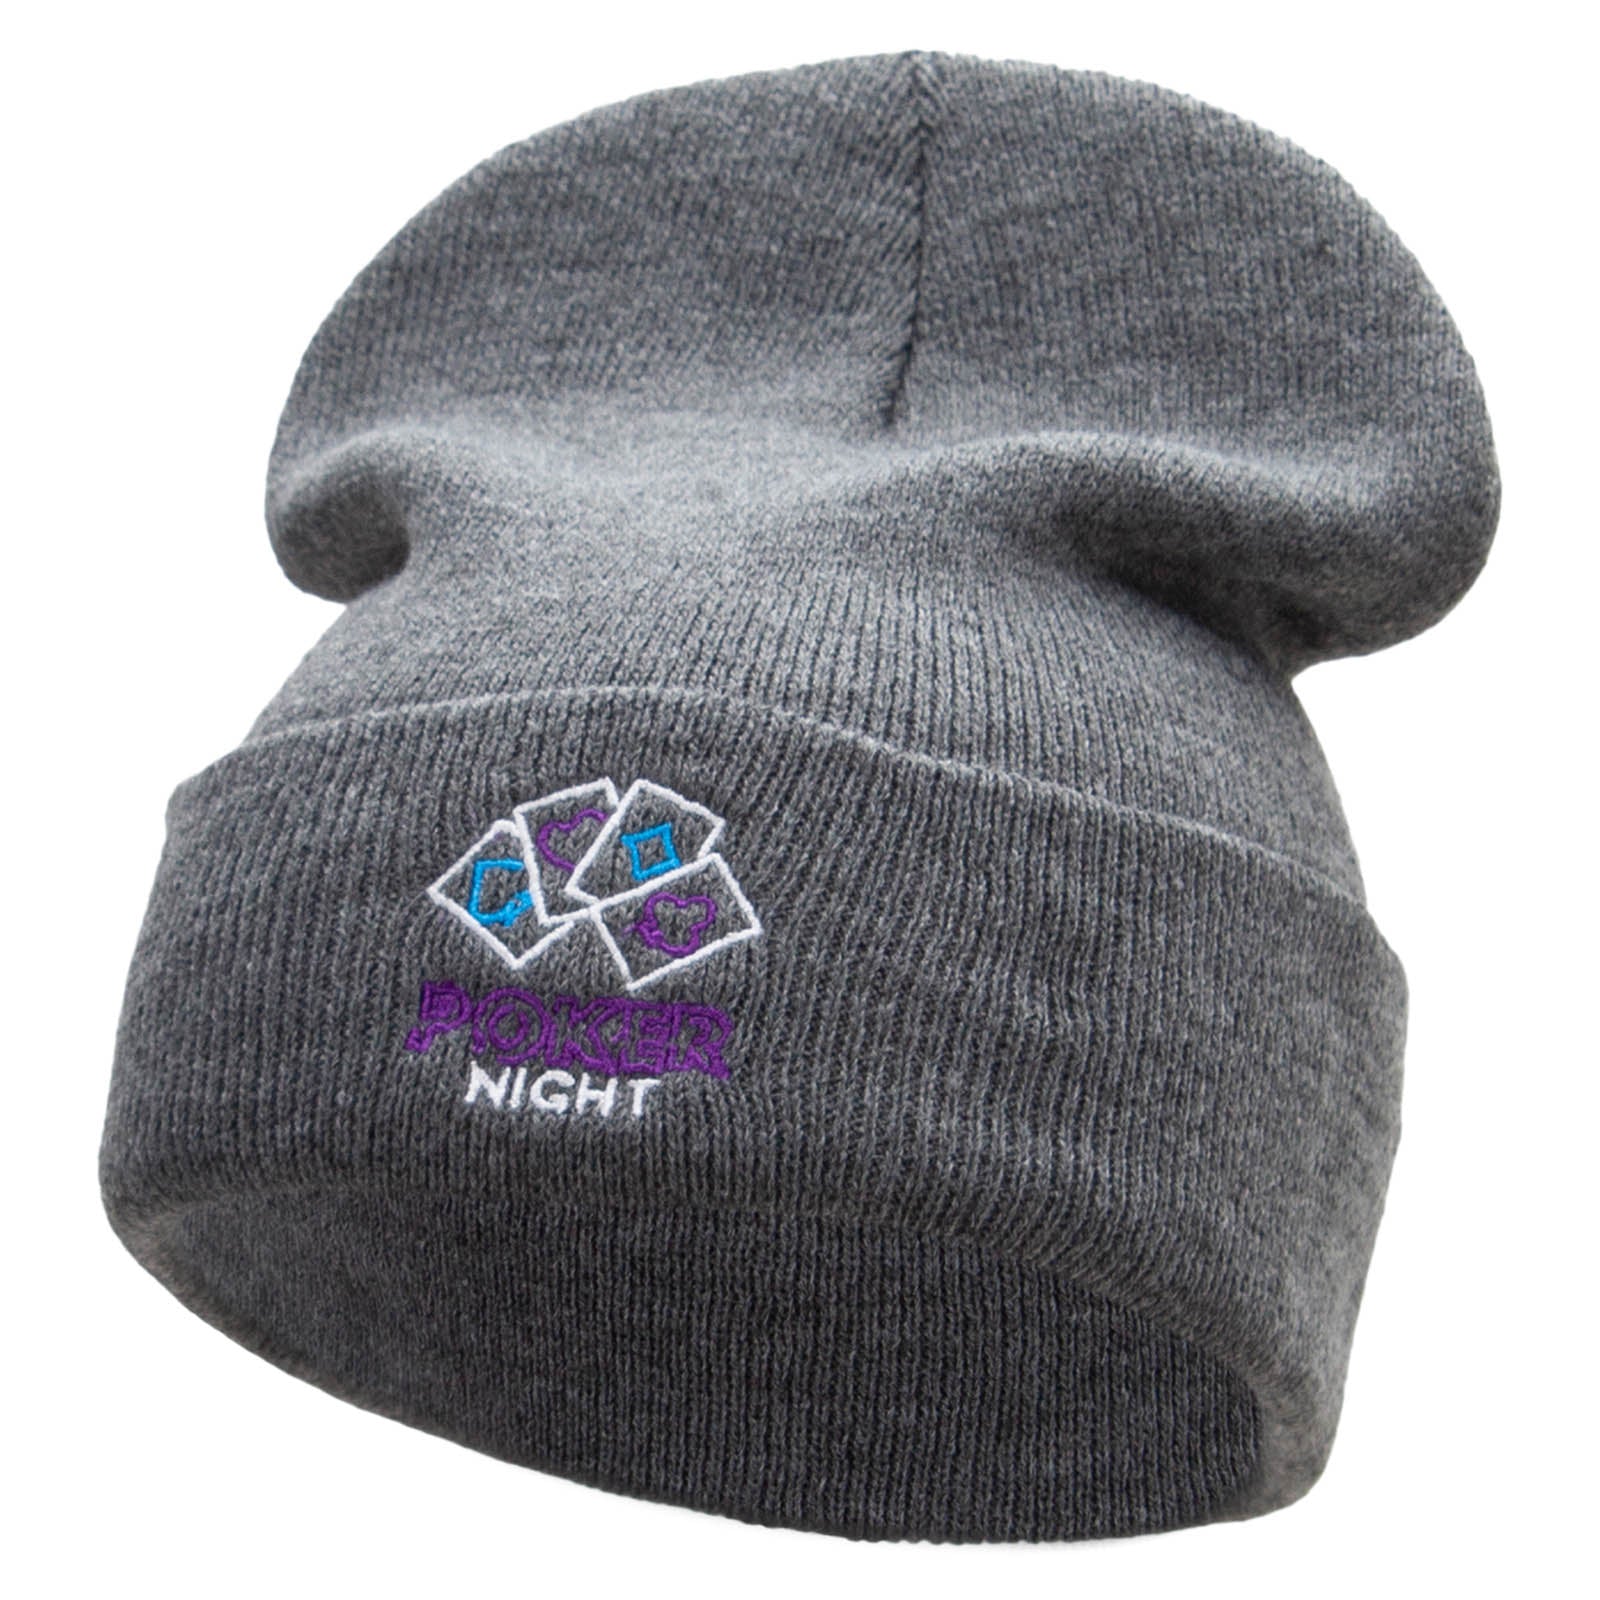 The Poker Night Embroidered 12 Inch Long Knitted Beanie - Dk Grey OSFM